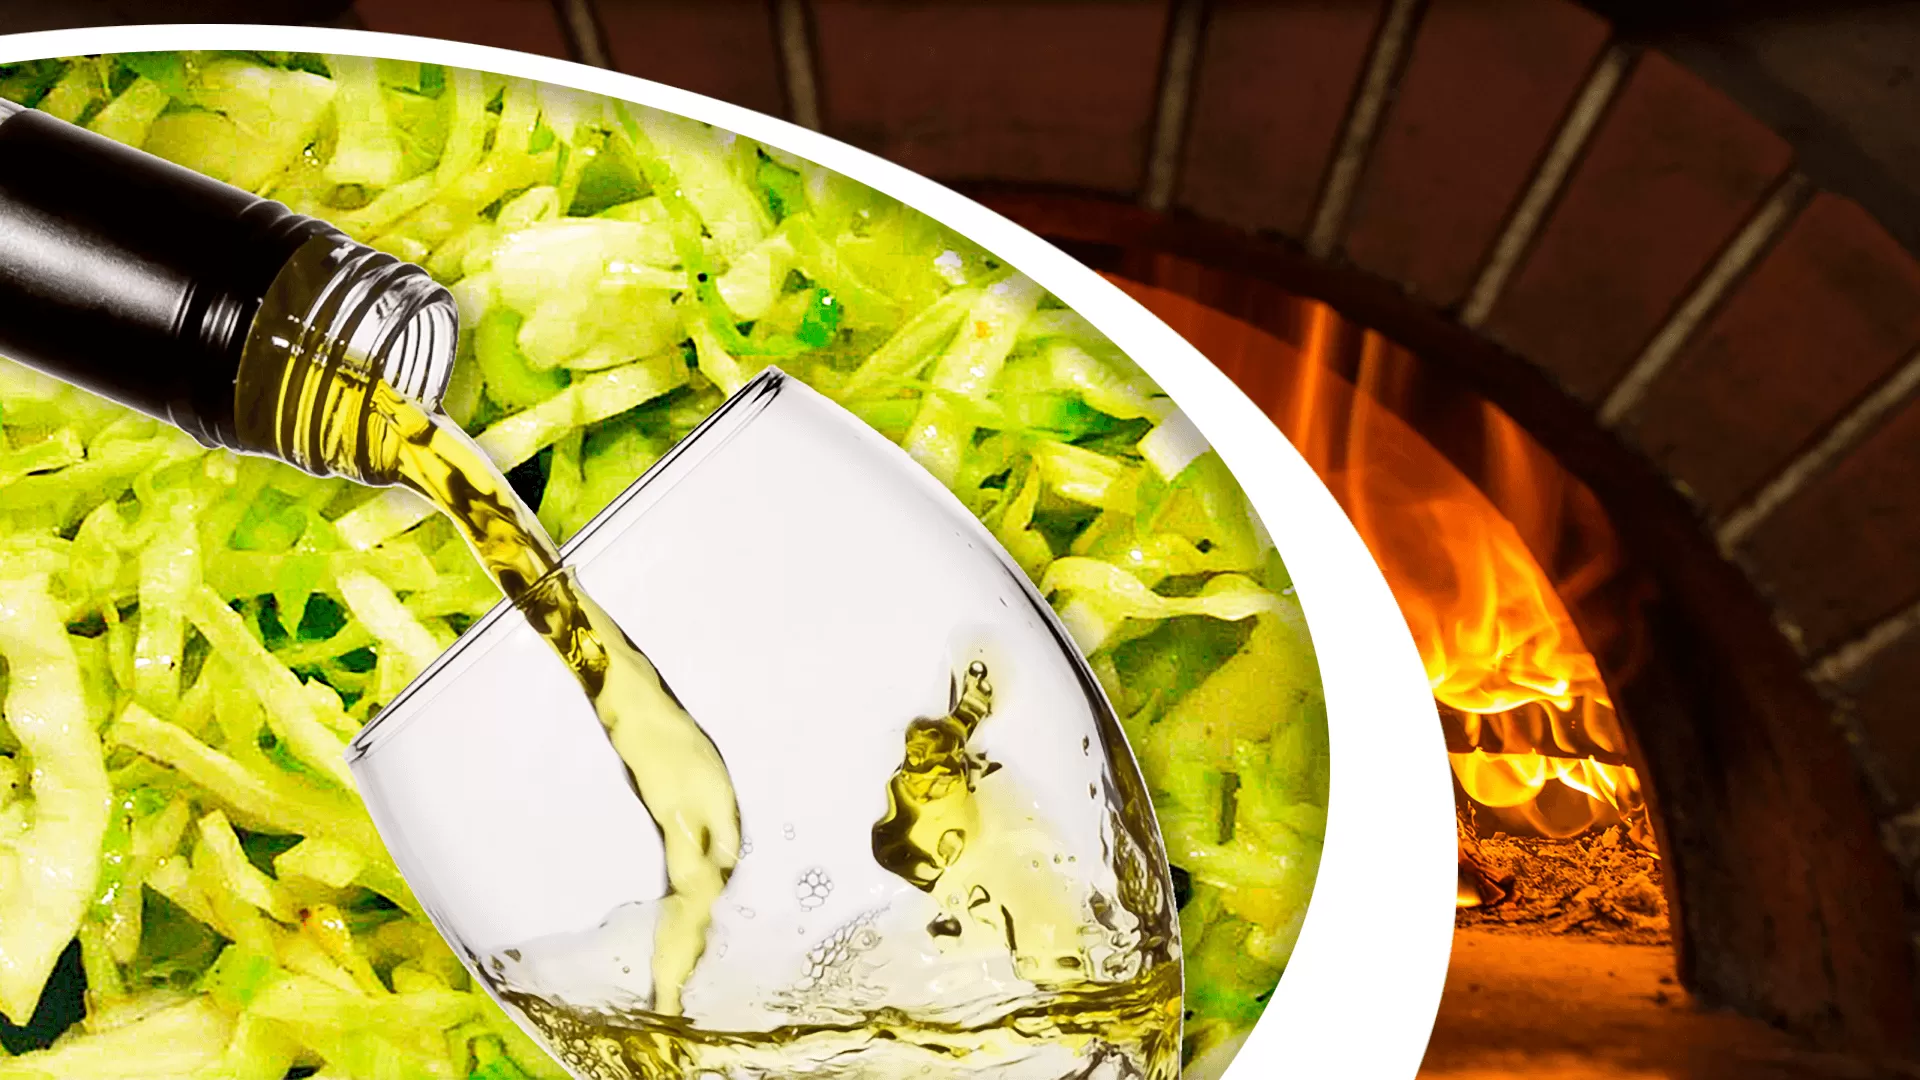 Cooking Cabbage with Wine in the Oven